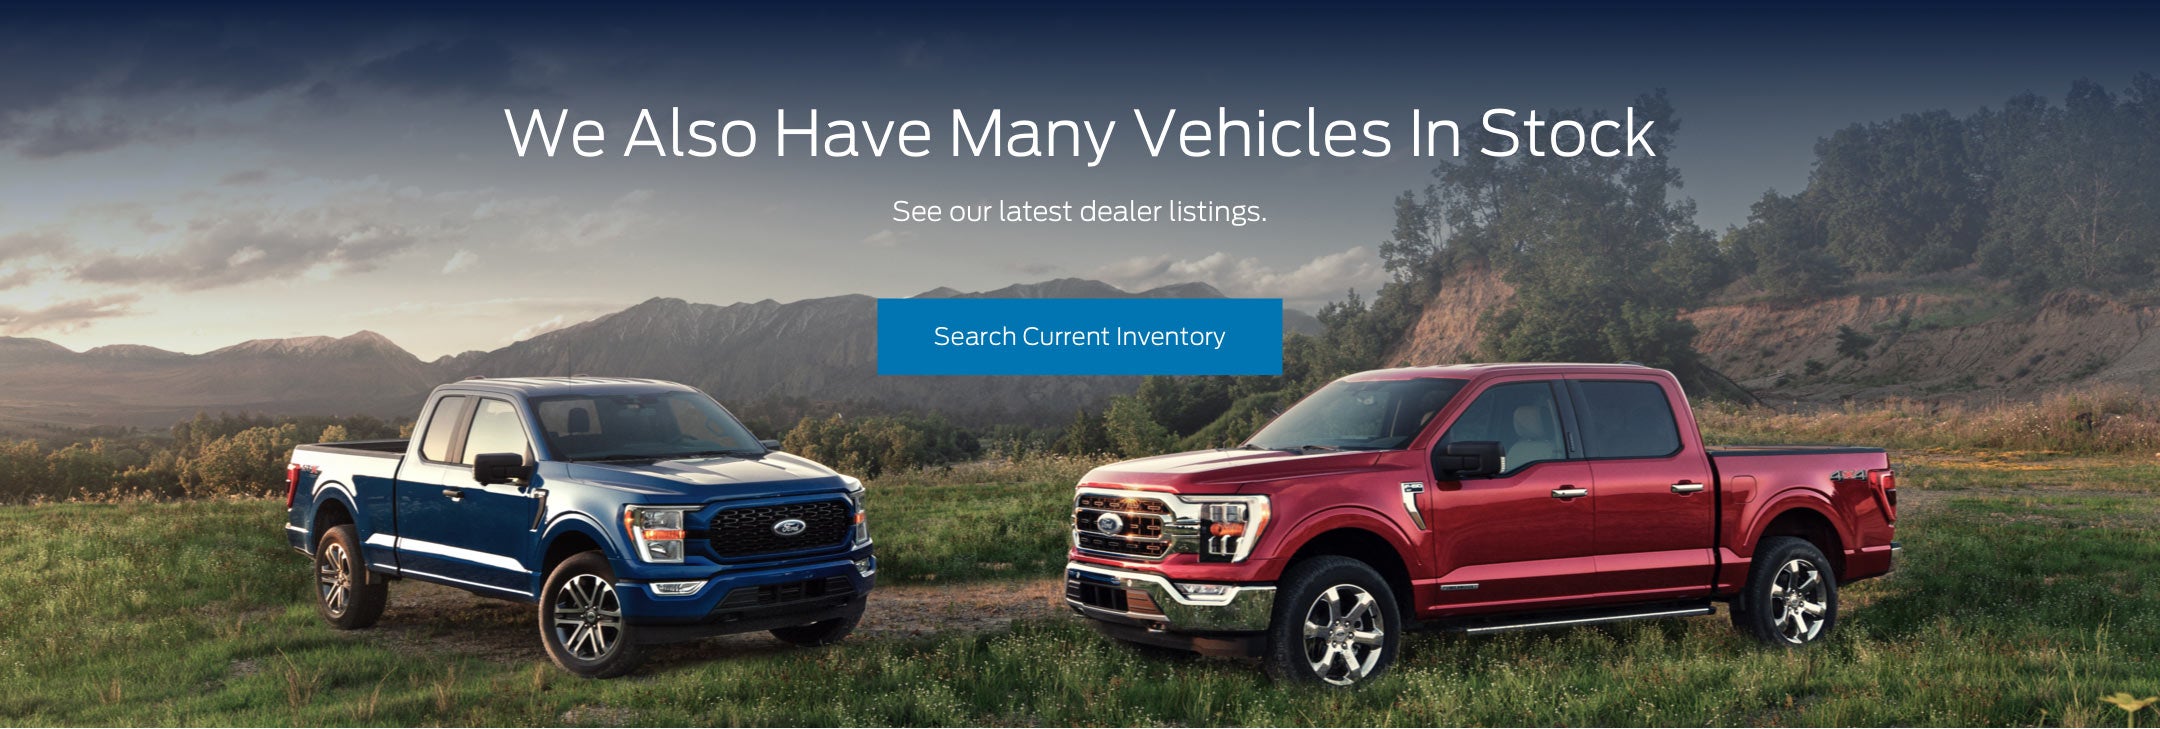 Ford vehicles in stock | Briggs Ford of Fort Scott in Fort Scott KS